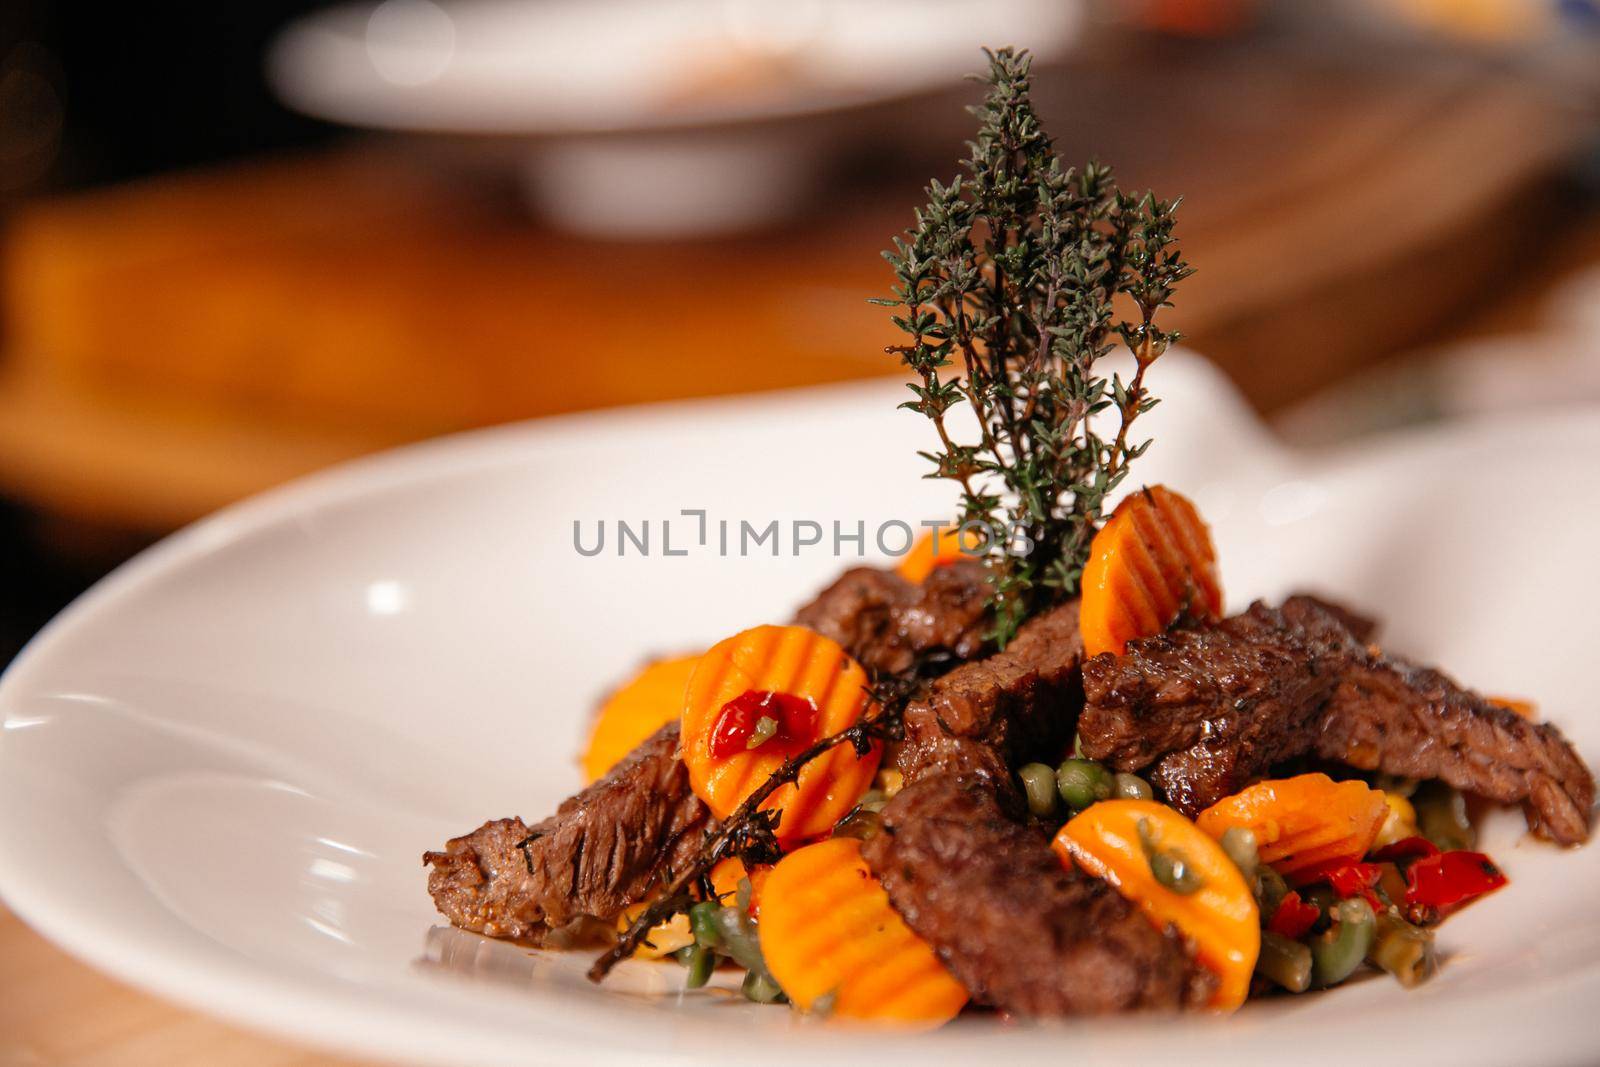 Beef Meal Presentation on White Plate by RecCameraStock